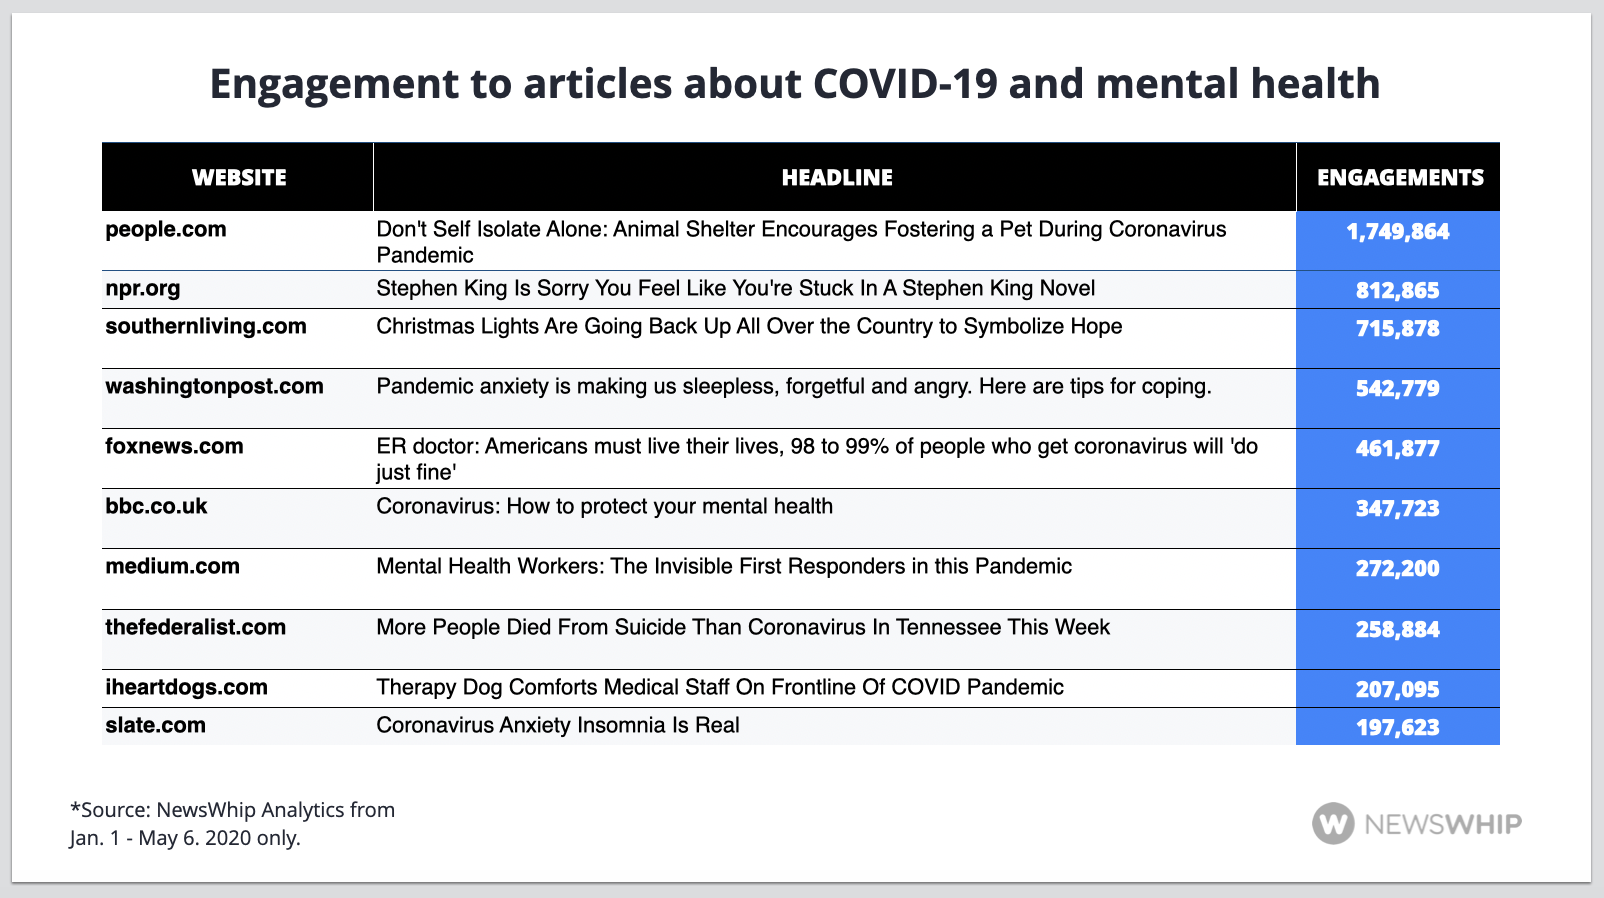 Chart showing the top articles about mental health and coronavirus, ranked by engagement